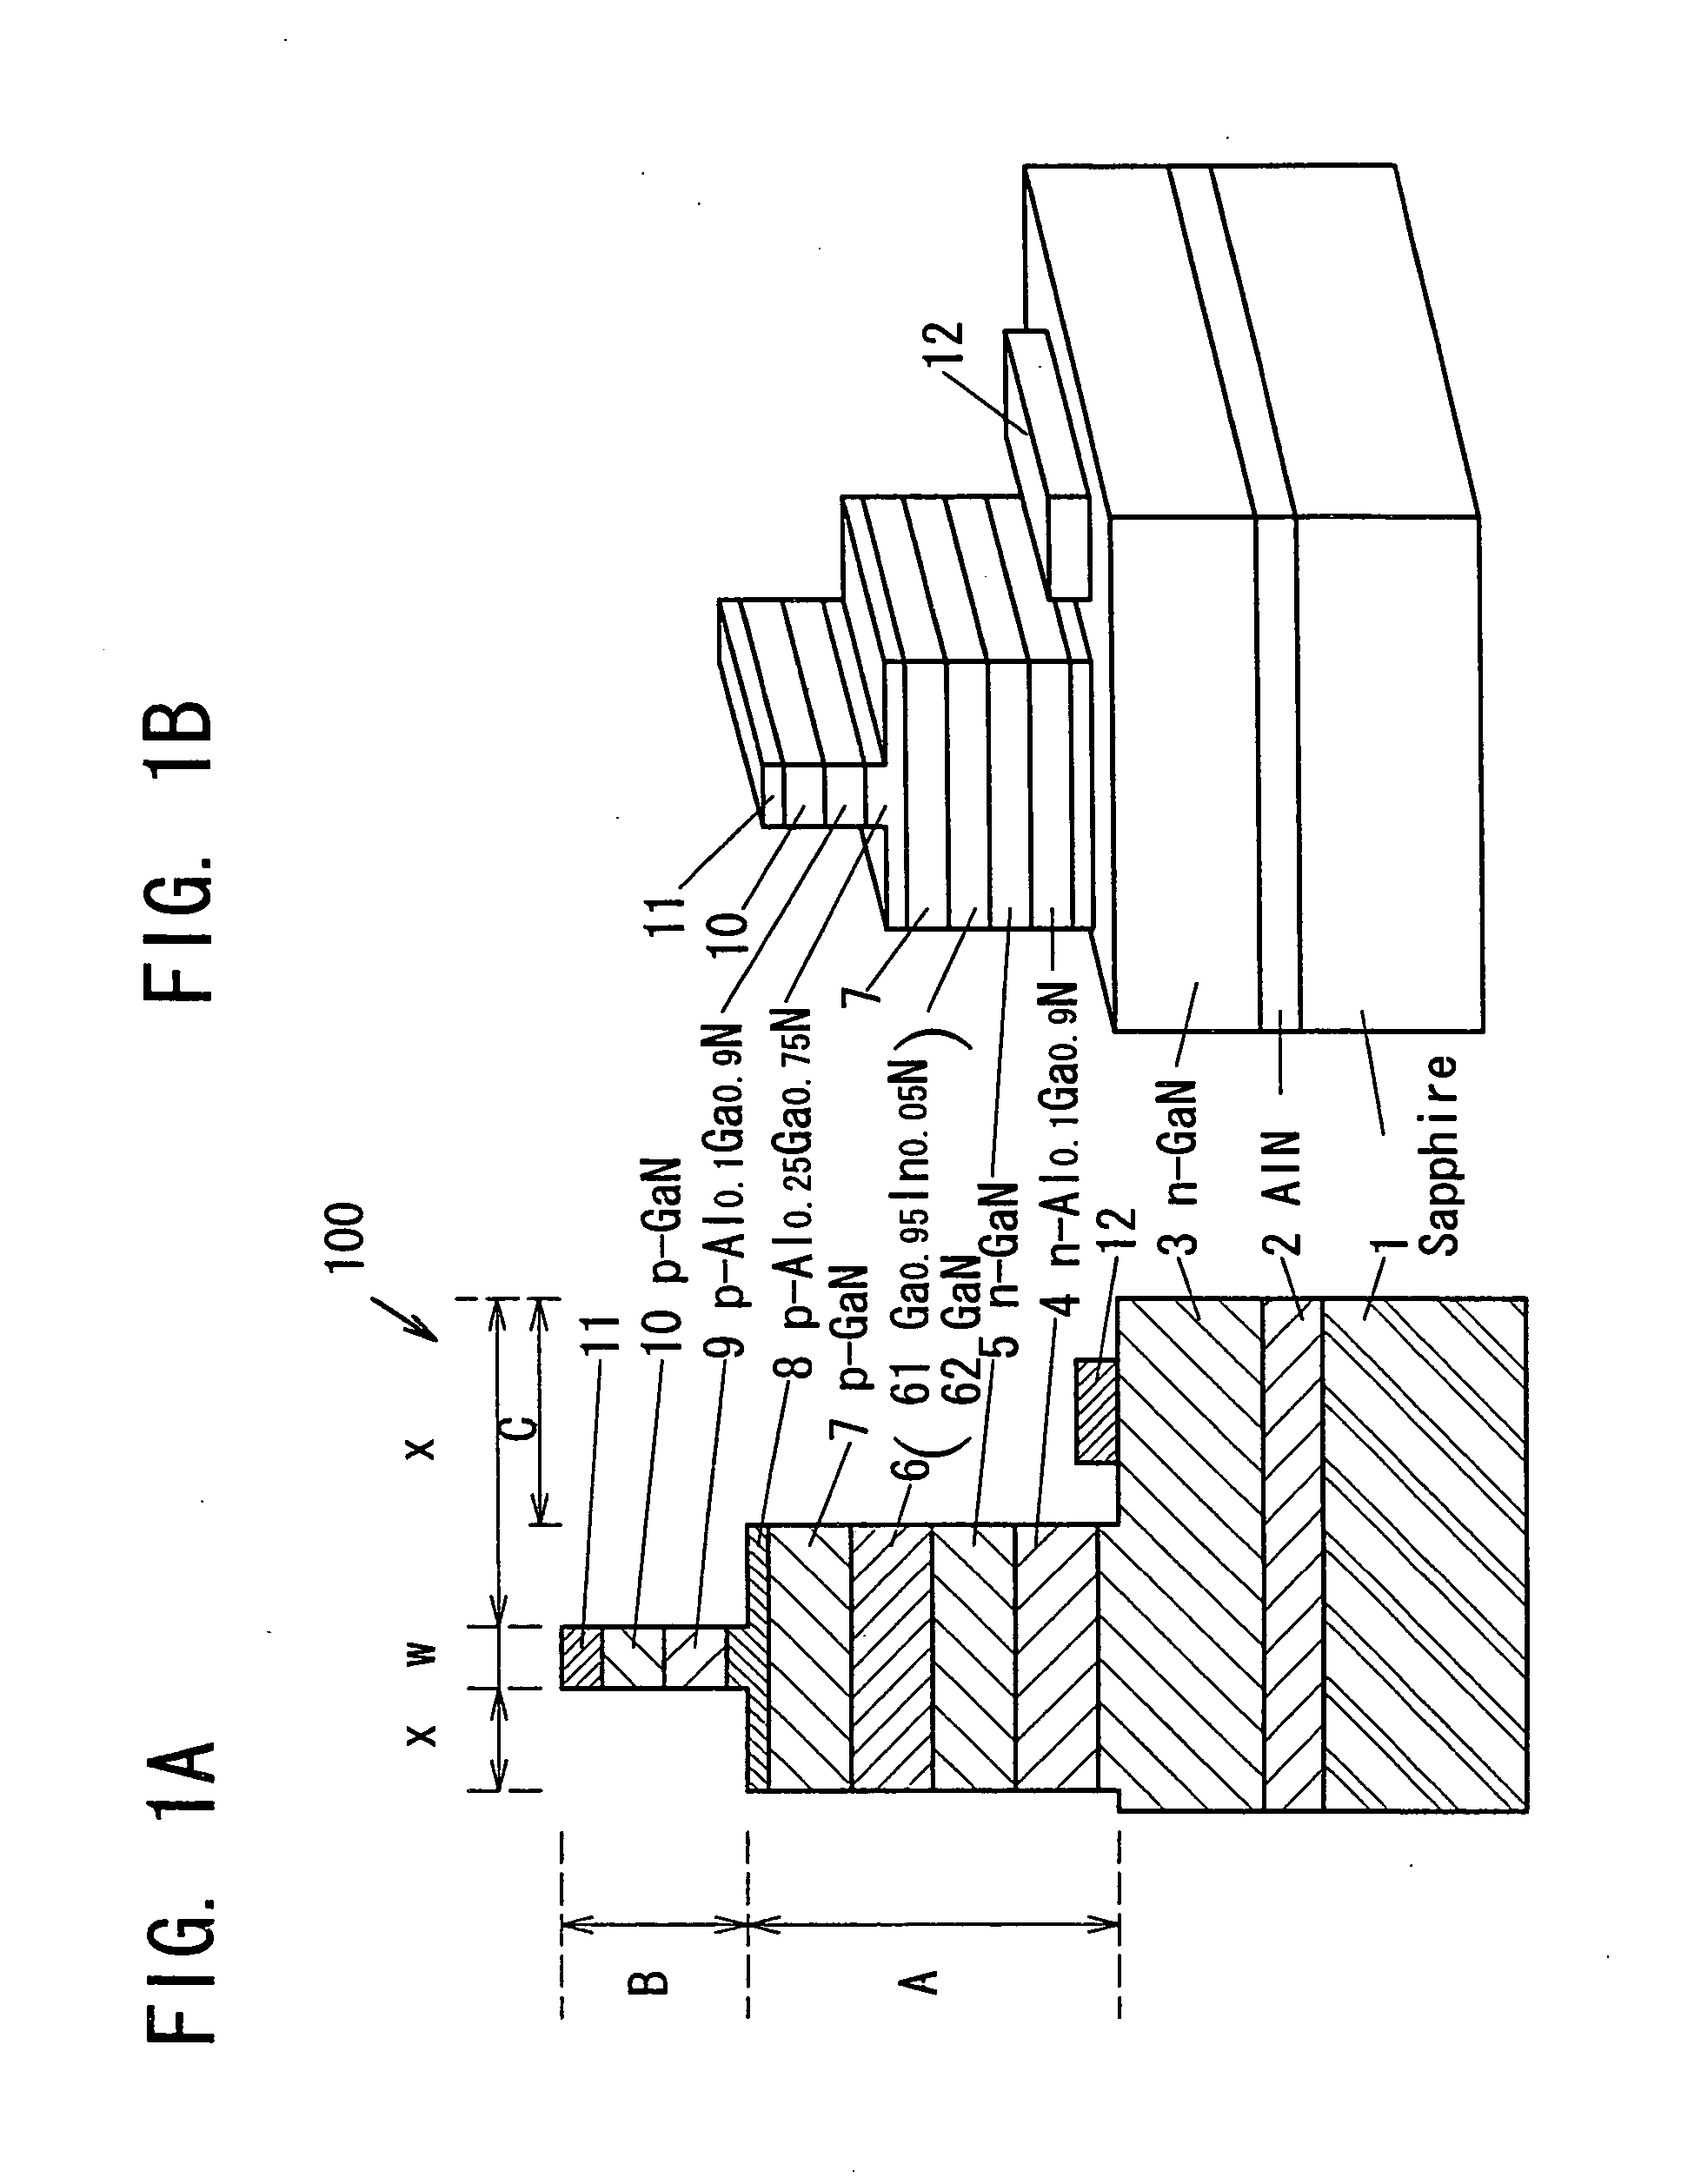 Group III nitride compound semiconductor laser